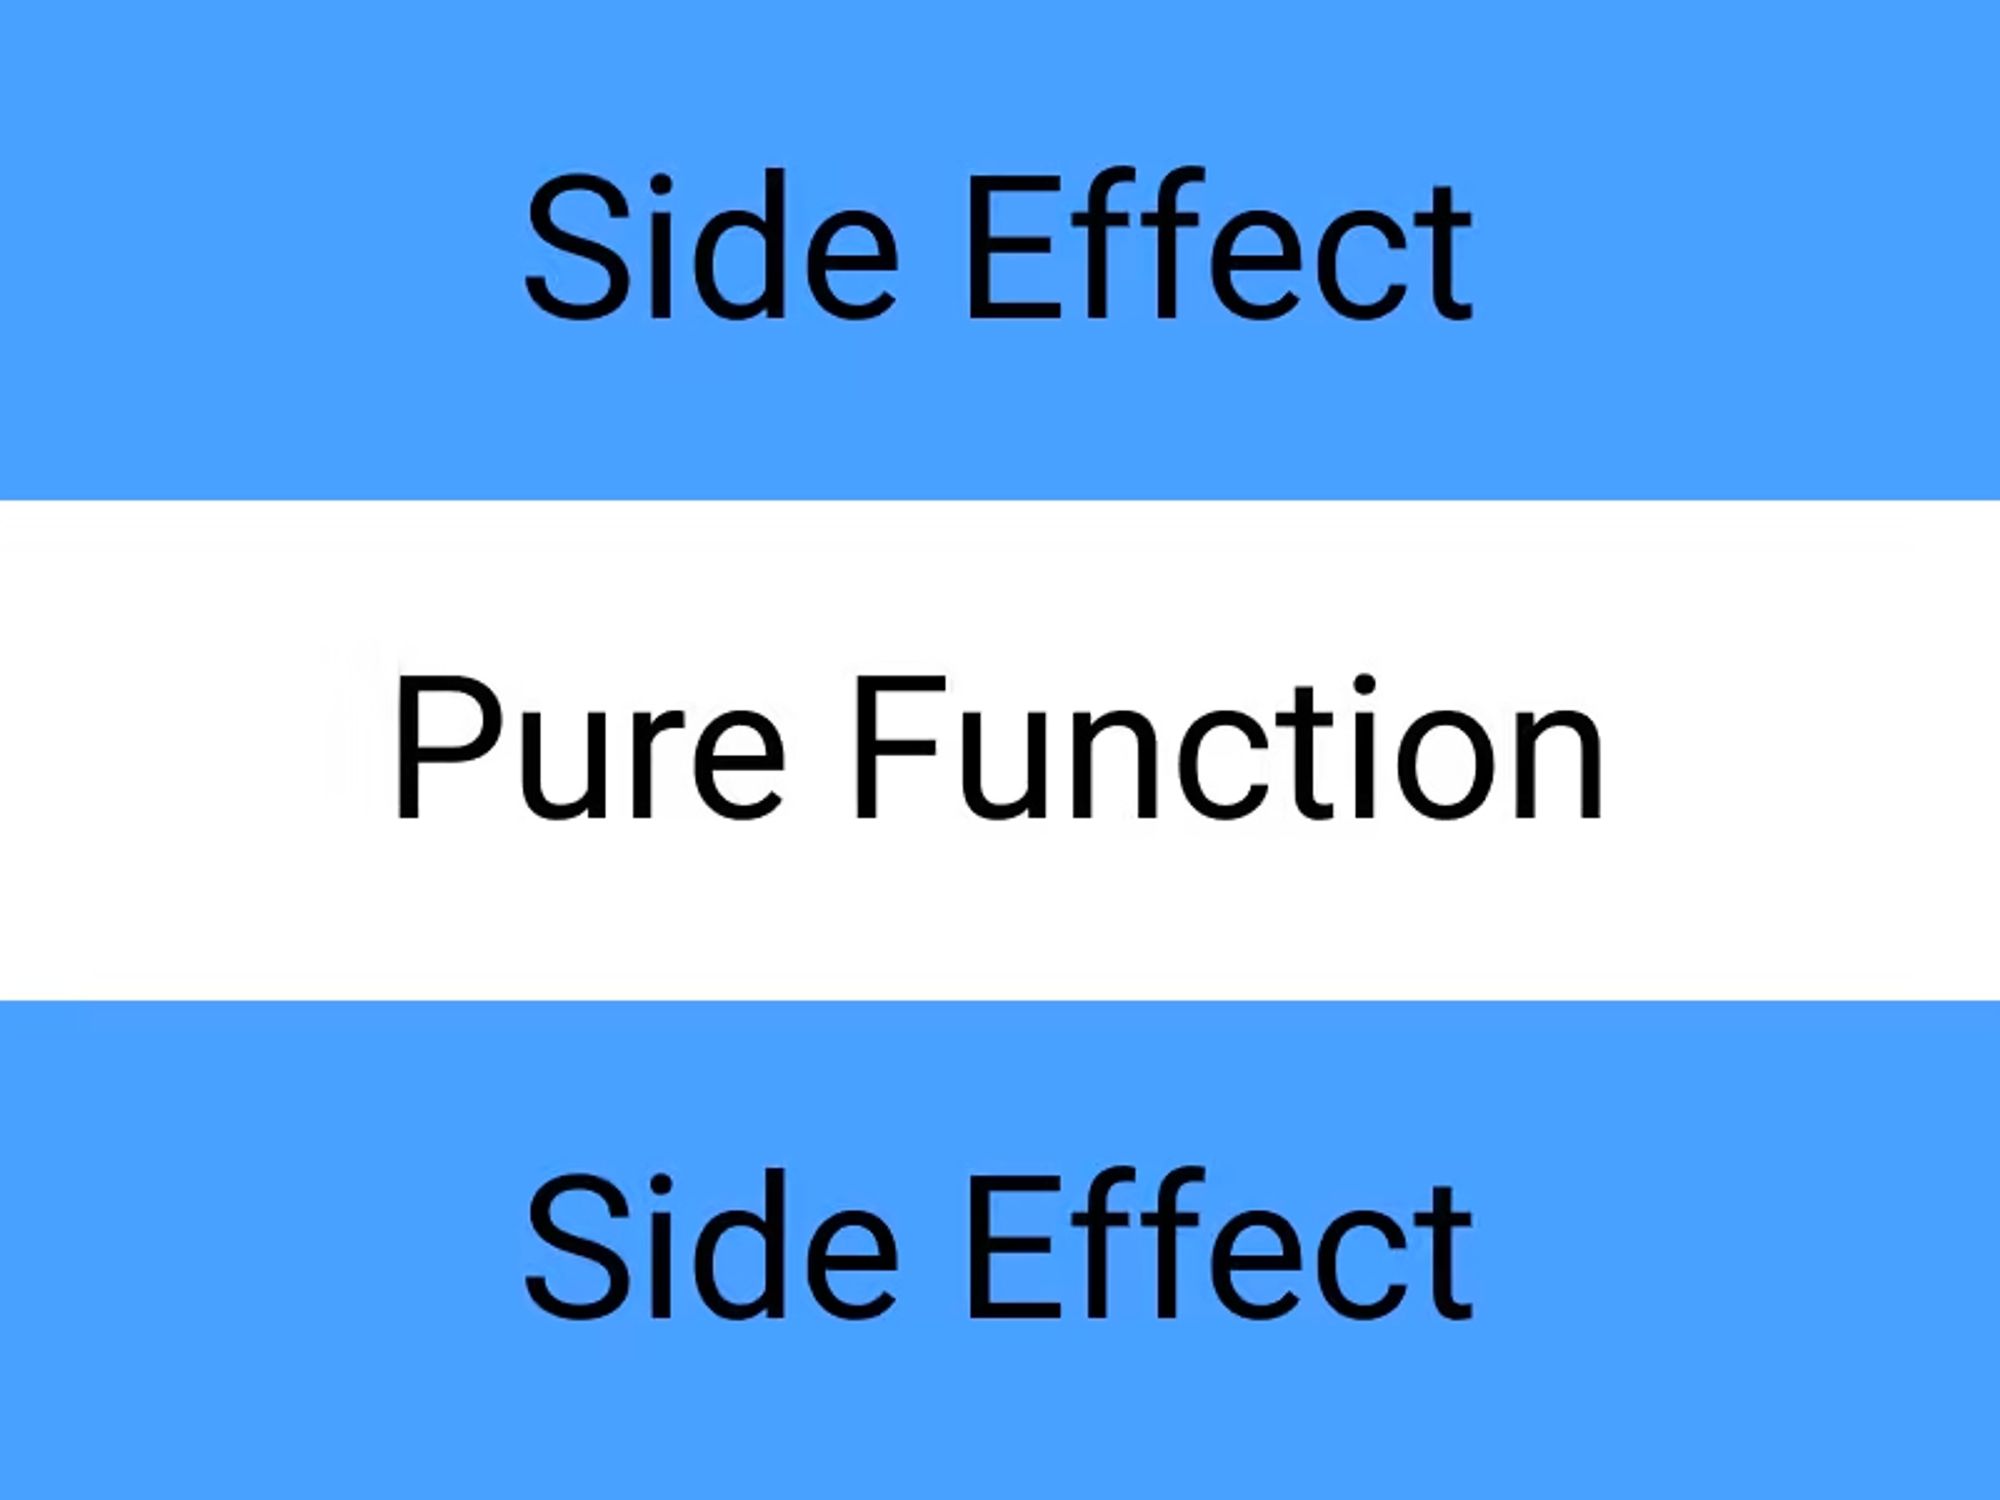 *Functional architecture: side-effect, pure function, side-effect*